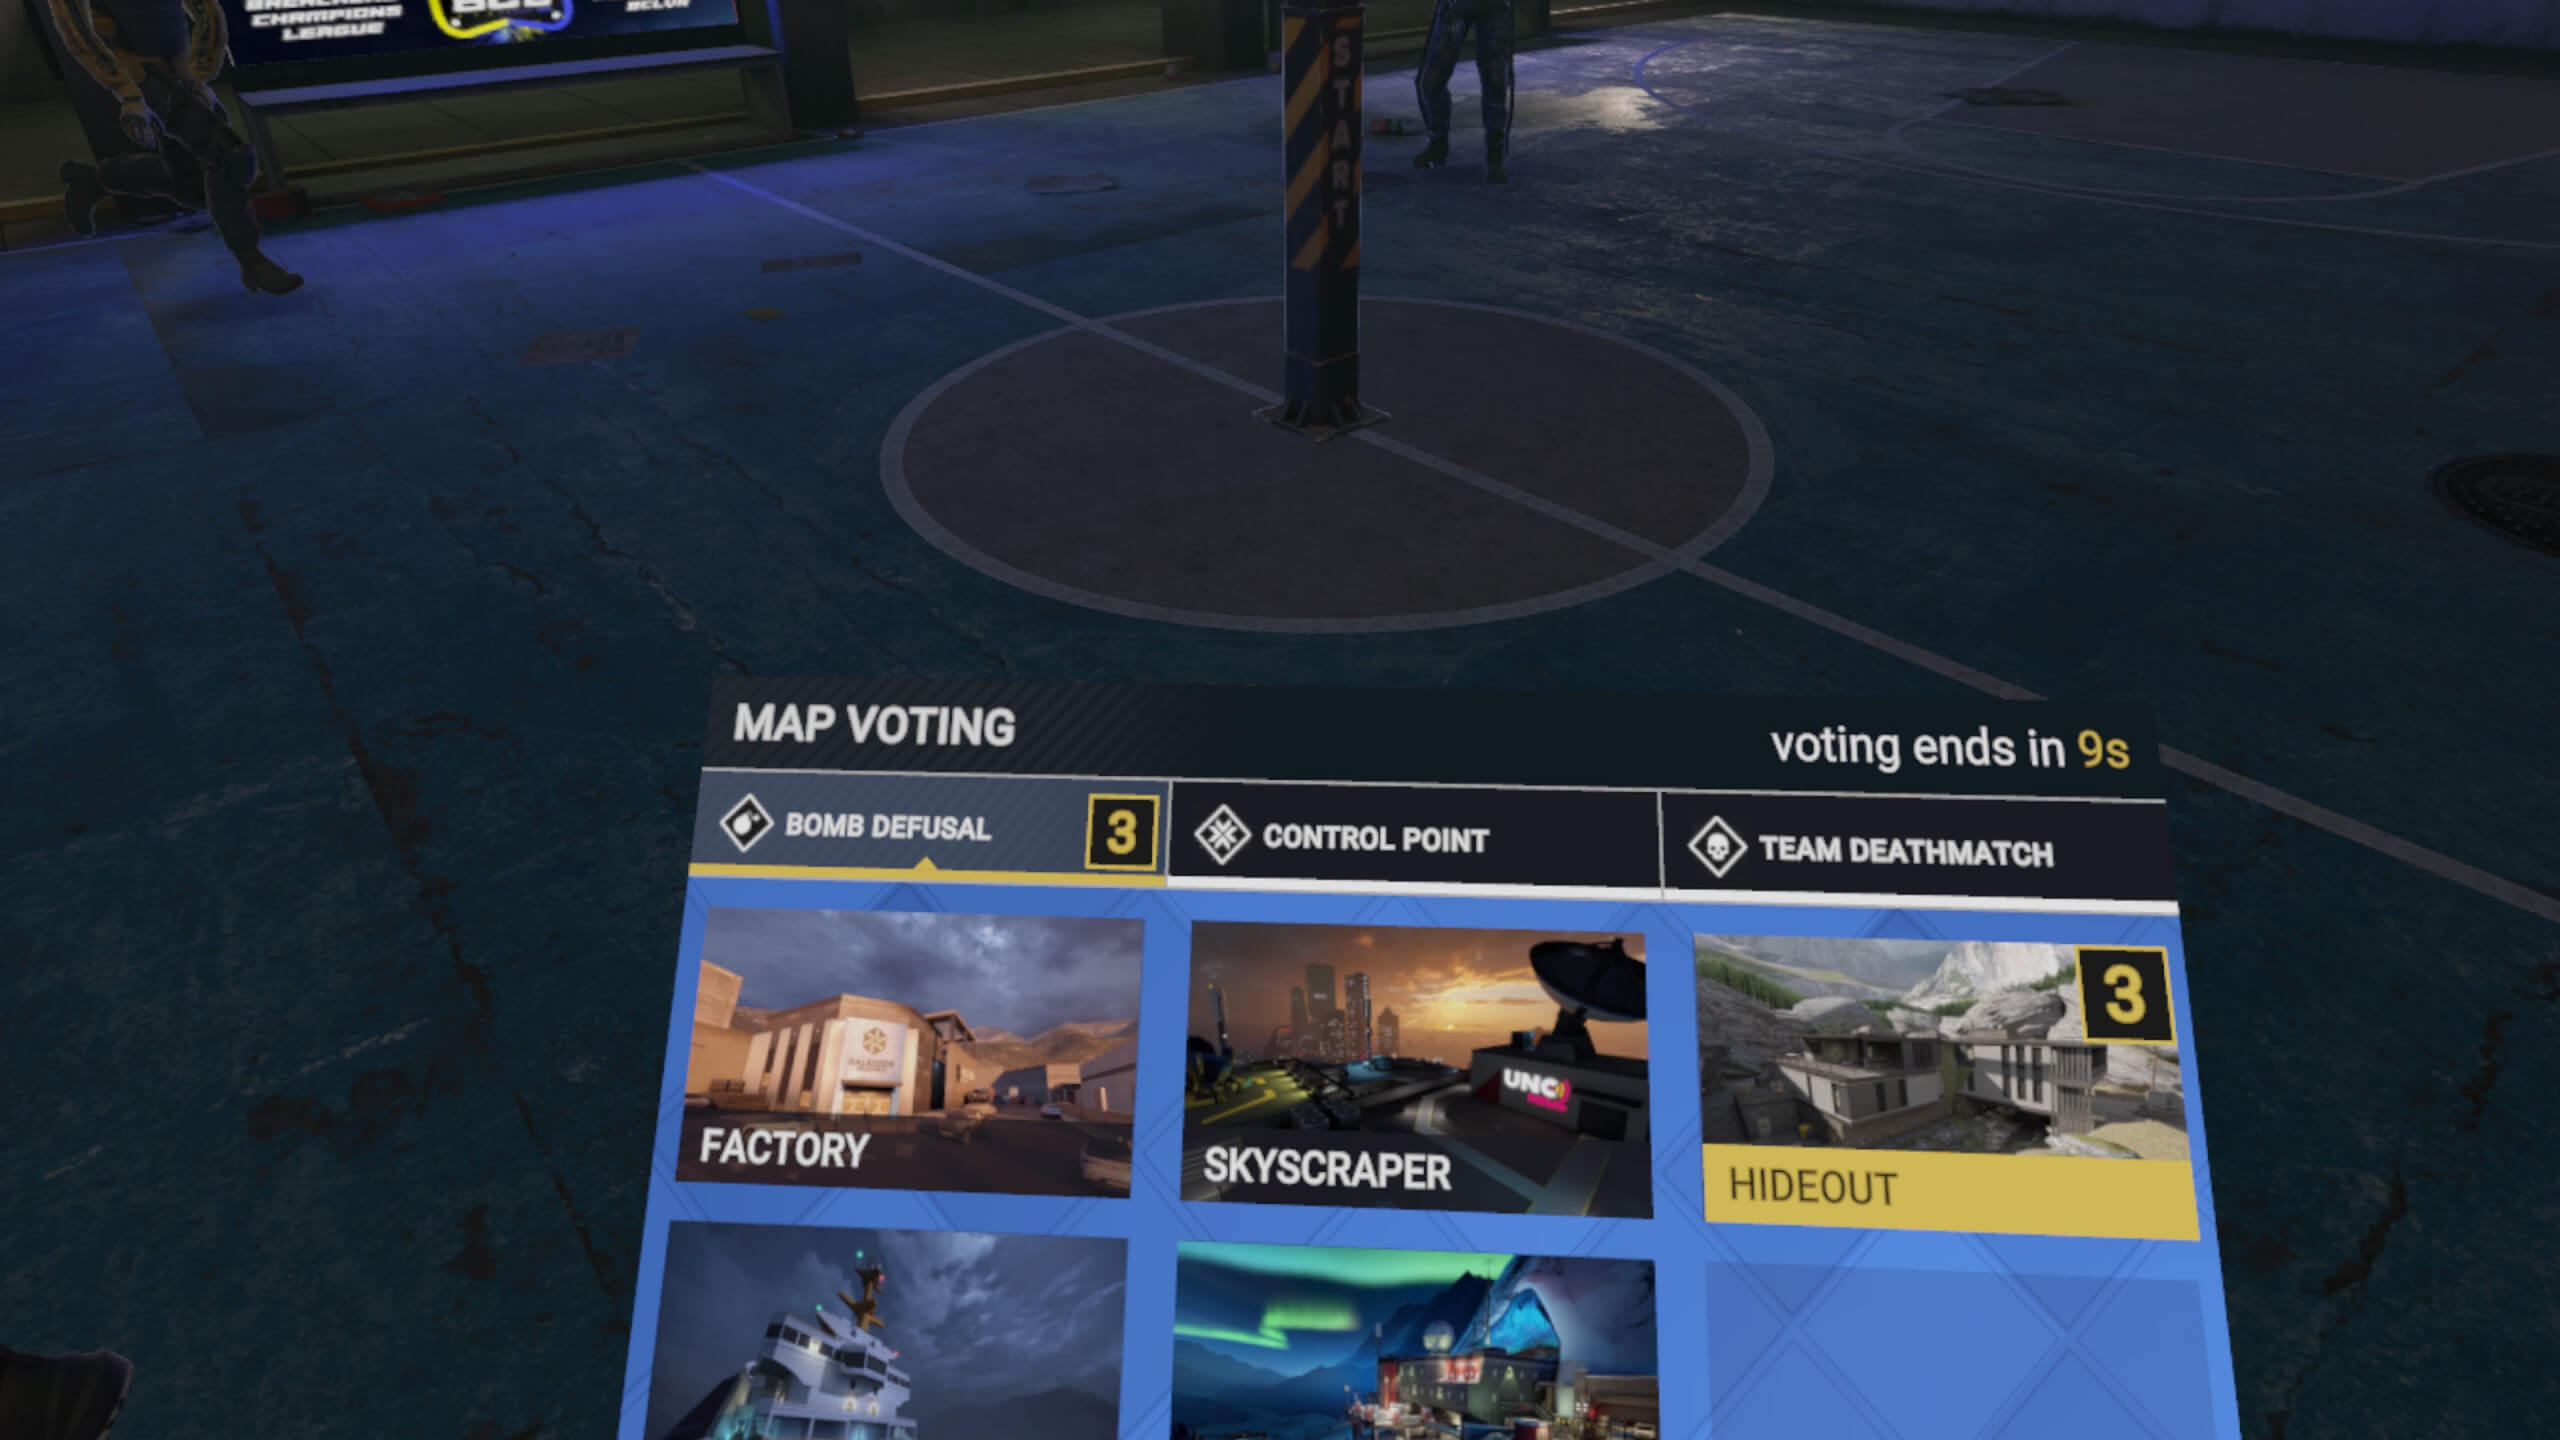 The pre-game voting system. options for what map and modes to play on.